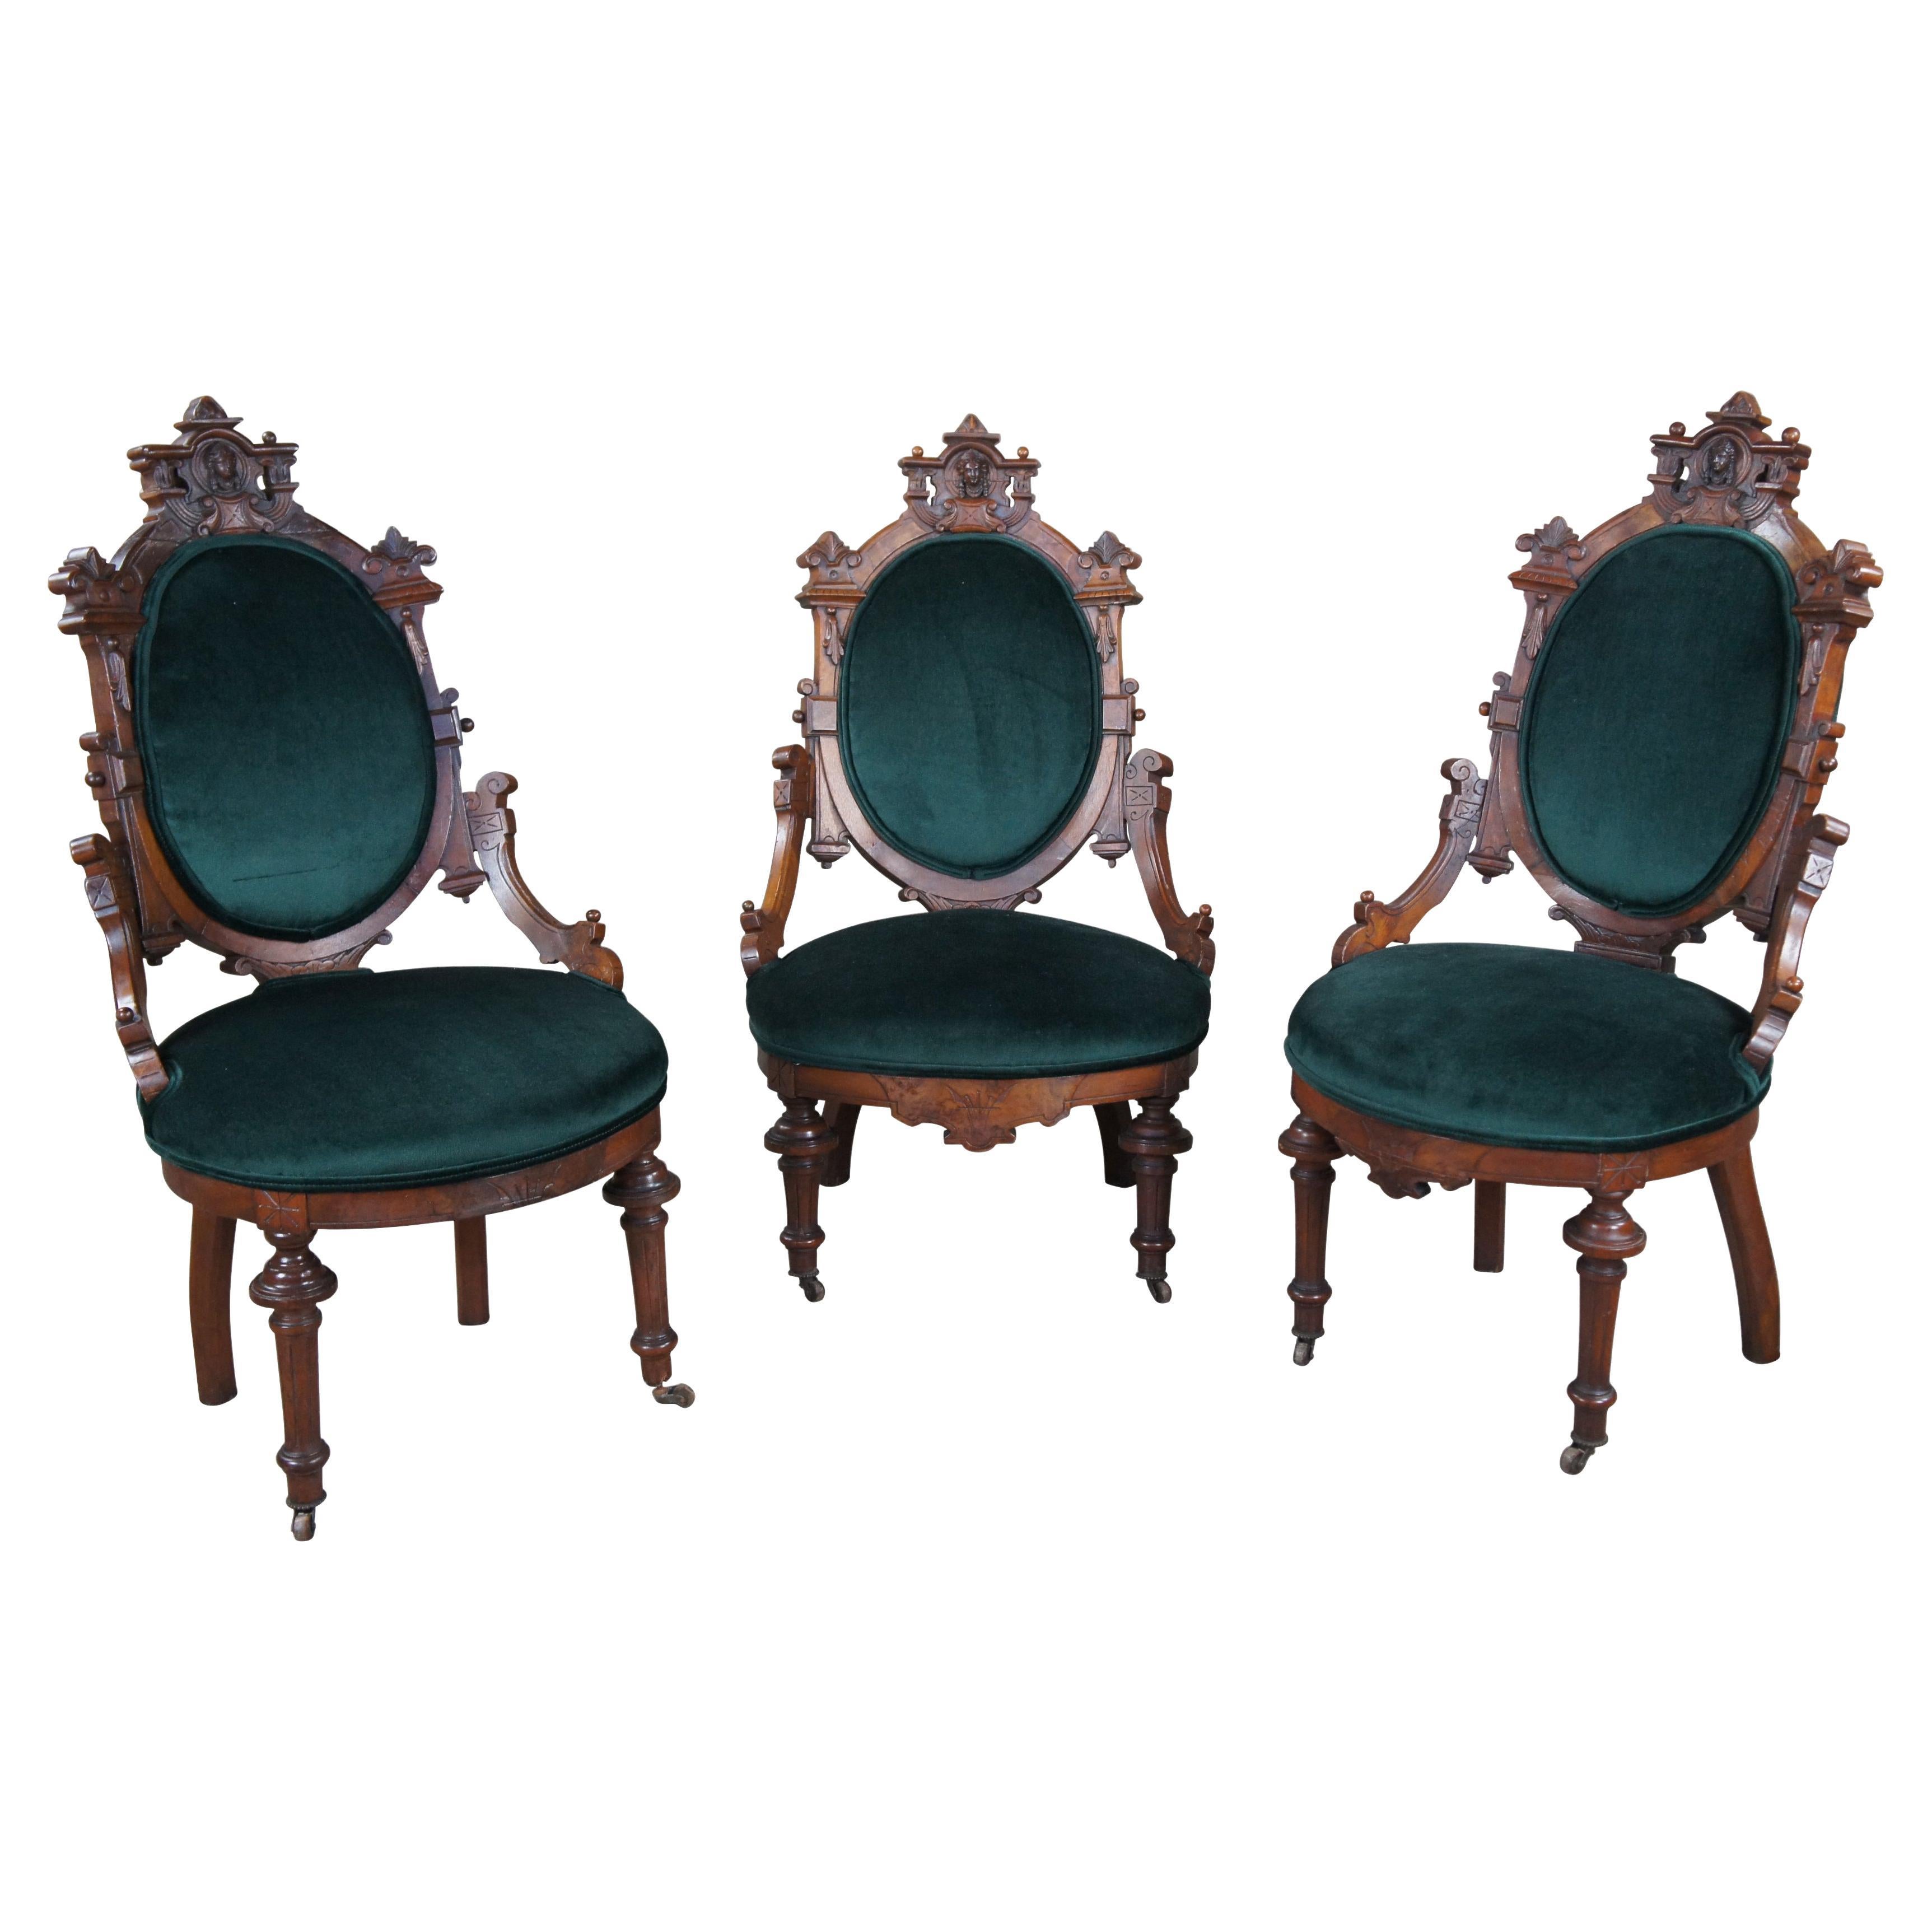 3 Antique Renaissance Revival Walnut Burl Carved Balloon Back Parlor Side Chairs